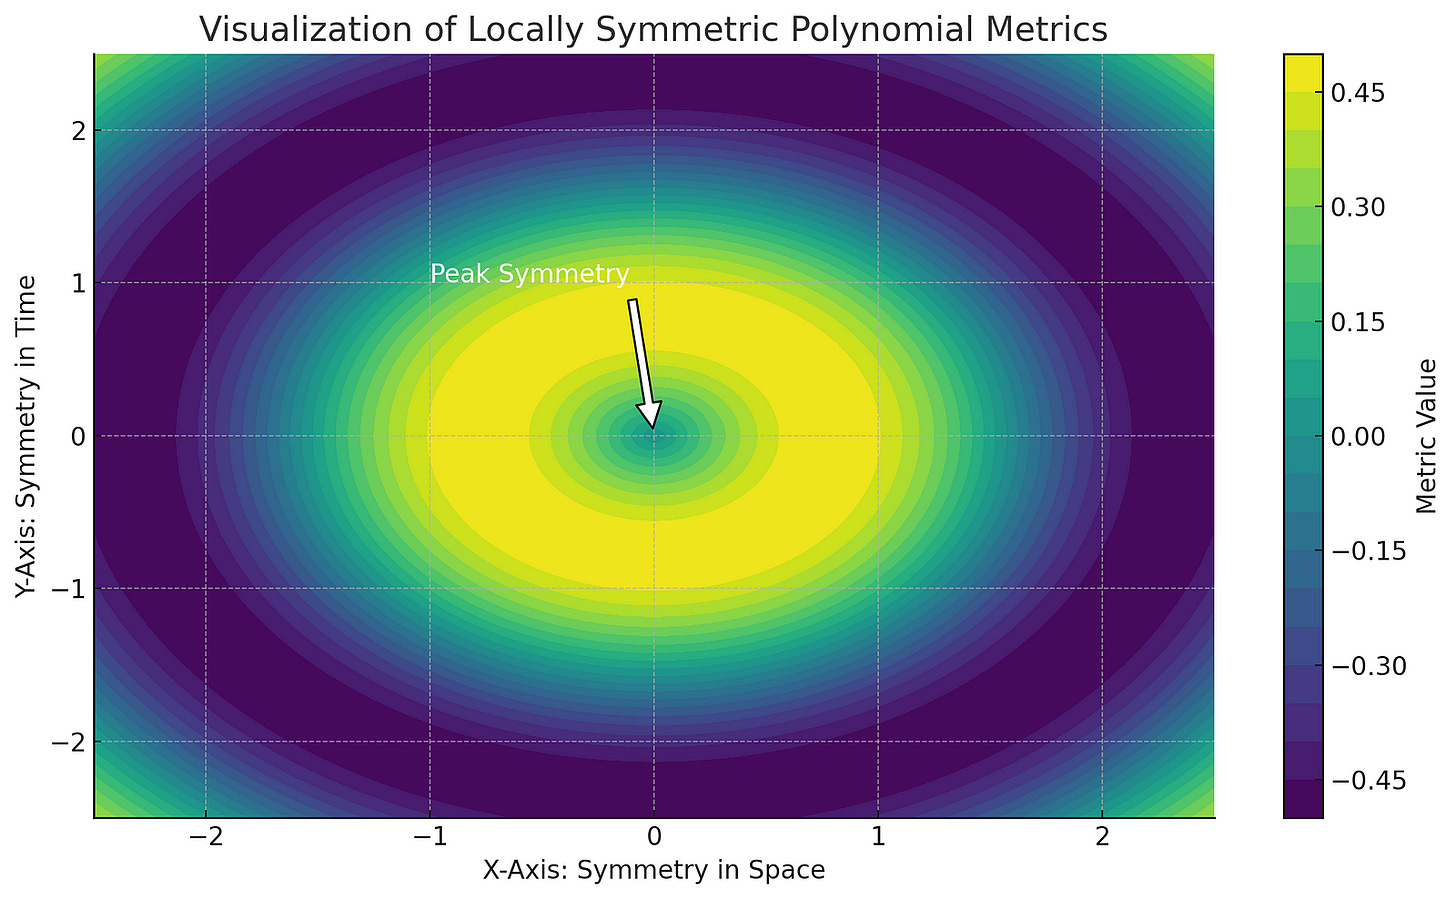 A colorful contour graph displaying peaks and valleys in shades of green, blue, and yellow, symbolizing the varying values of locally symmetric polynomial metrics in space and time, with a peak of symmetry highlighted in the center.